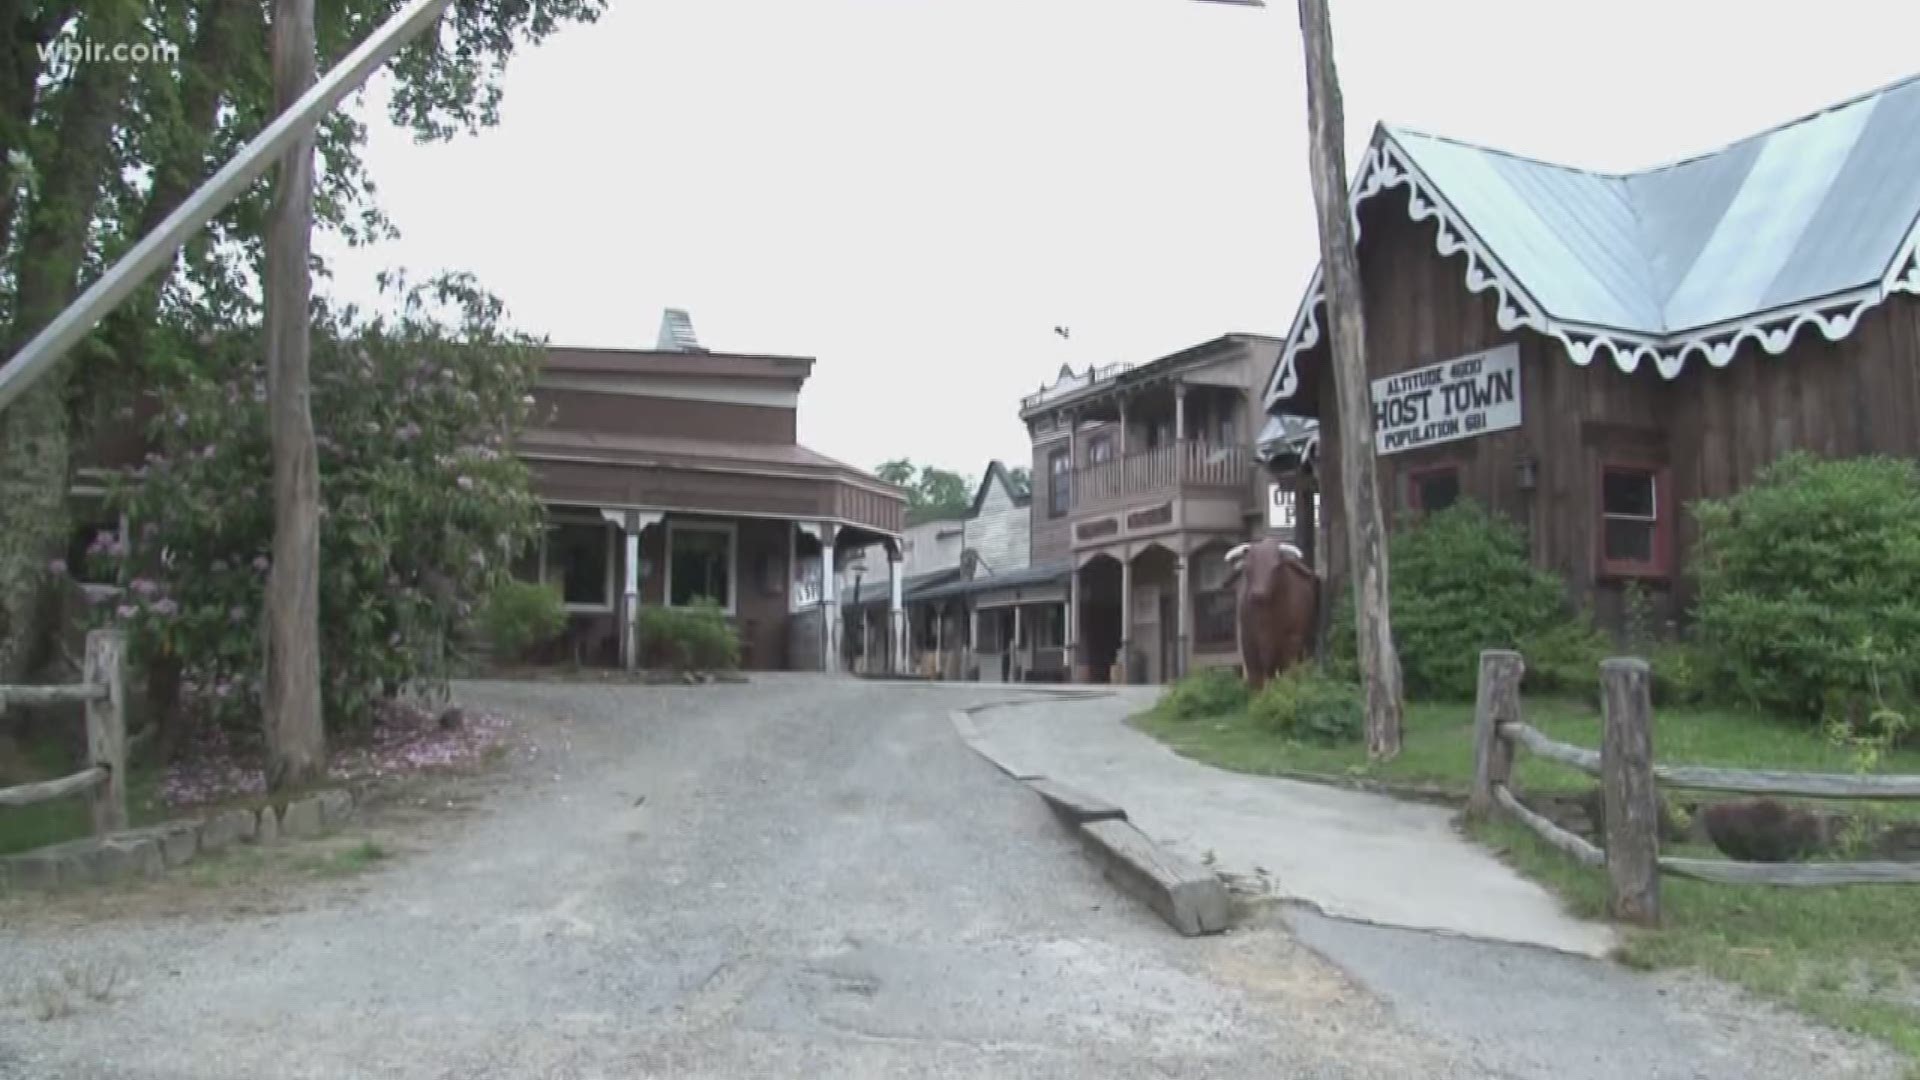 An old-time North Carolina theme park appears to back on the market. A online listing has the Ghost Town amusement park listed for nearly 6 million dollars.